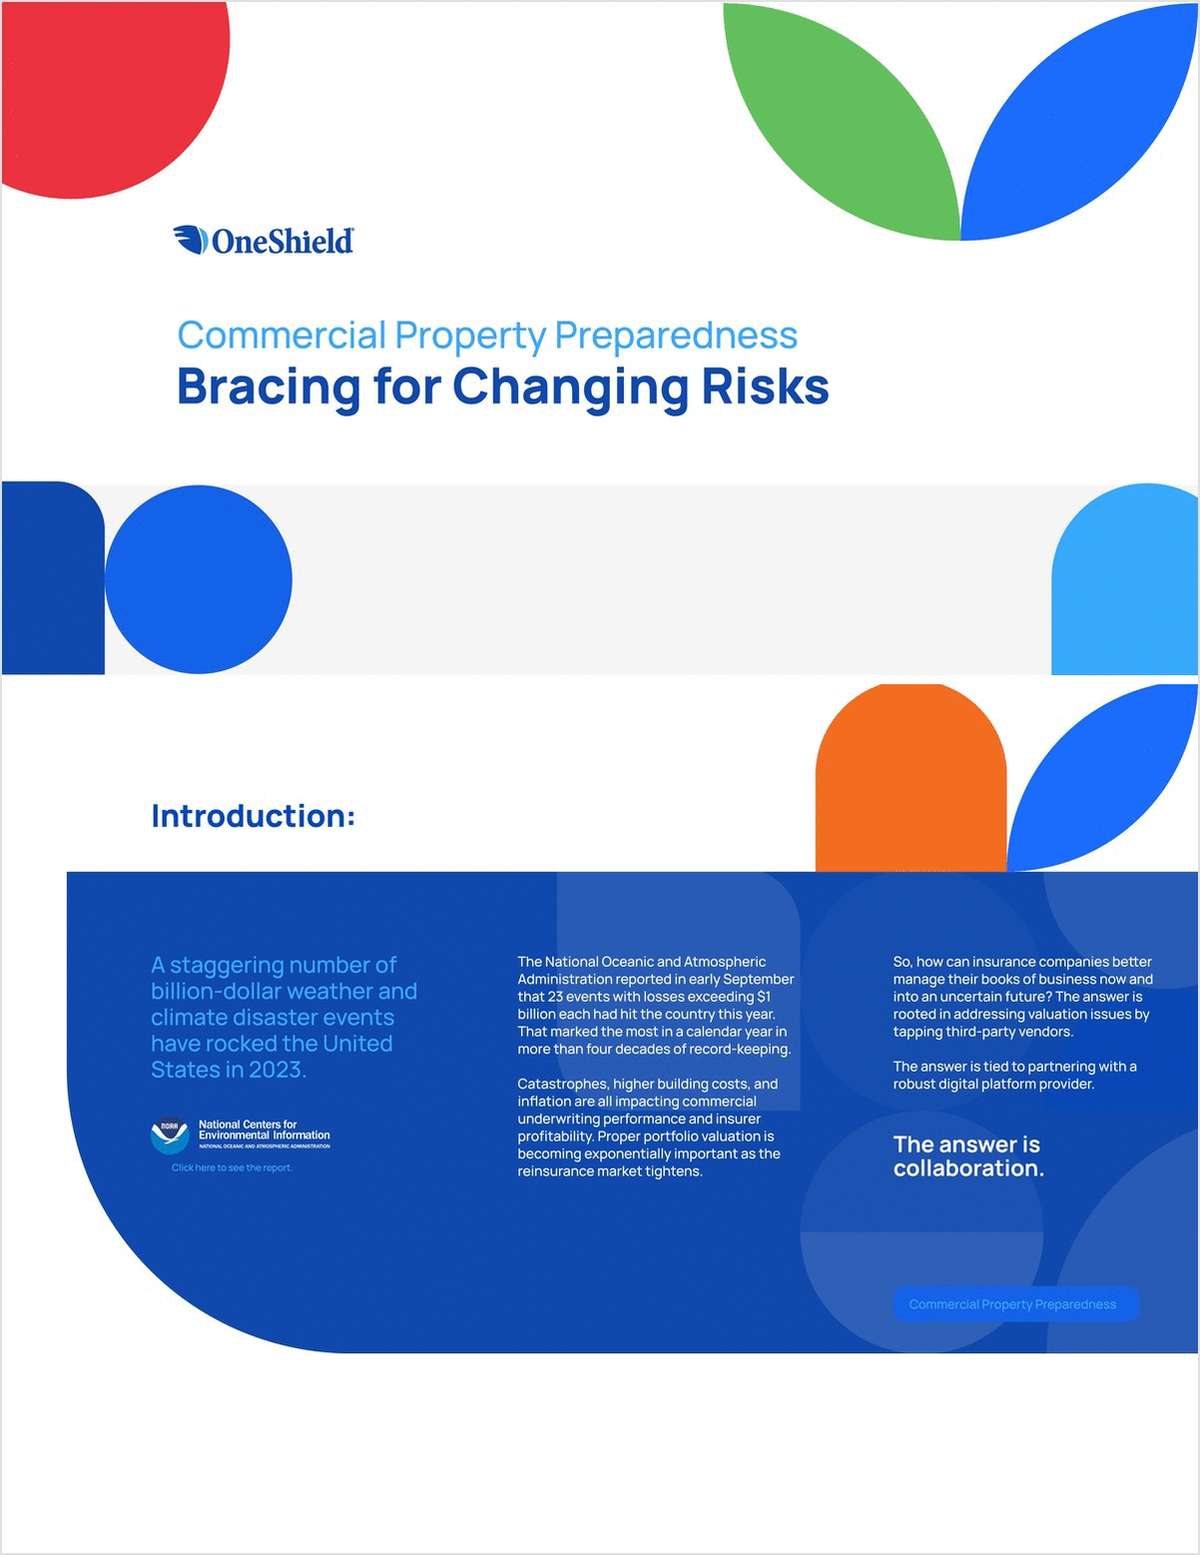 Commercial Property Preparedness: Bracing for Changing Risks